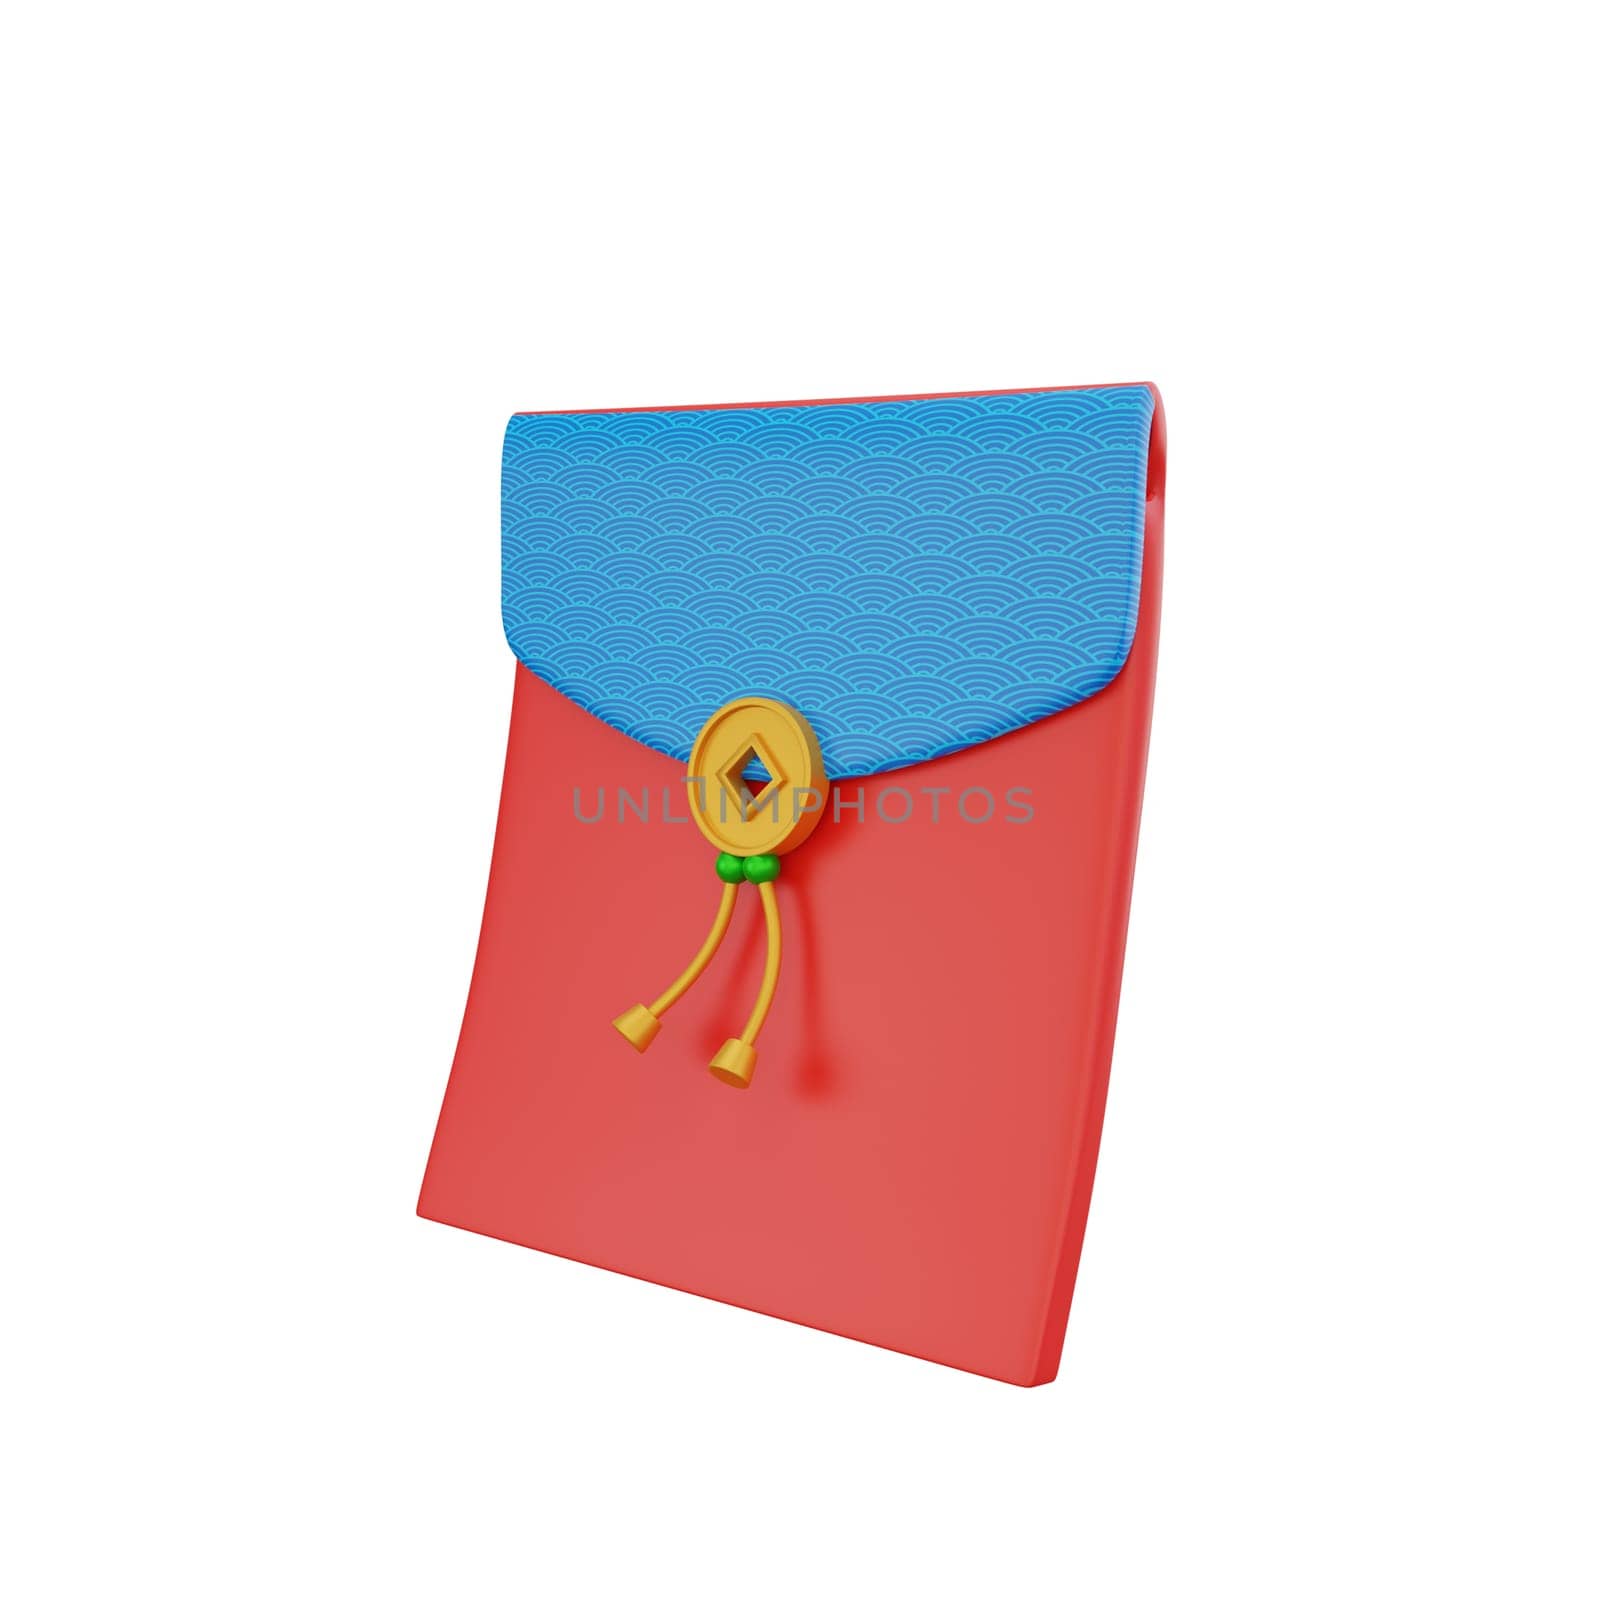 3D illustration of Chinese Envelope icon, perfect for a Chinese New Year theme